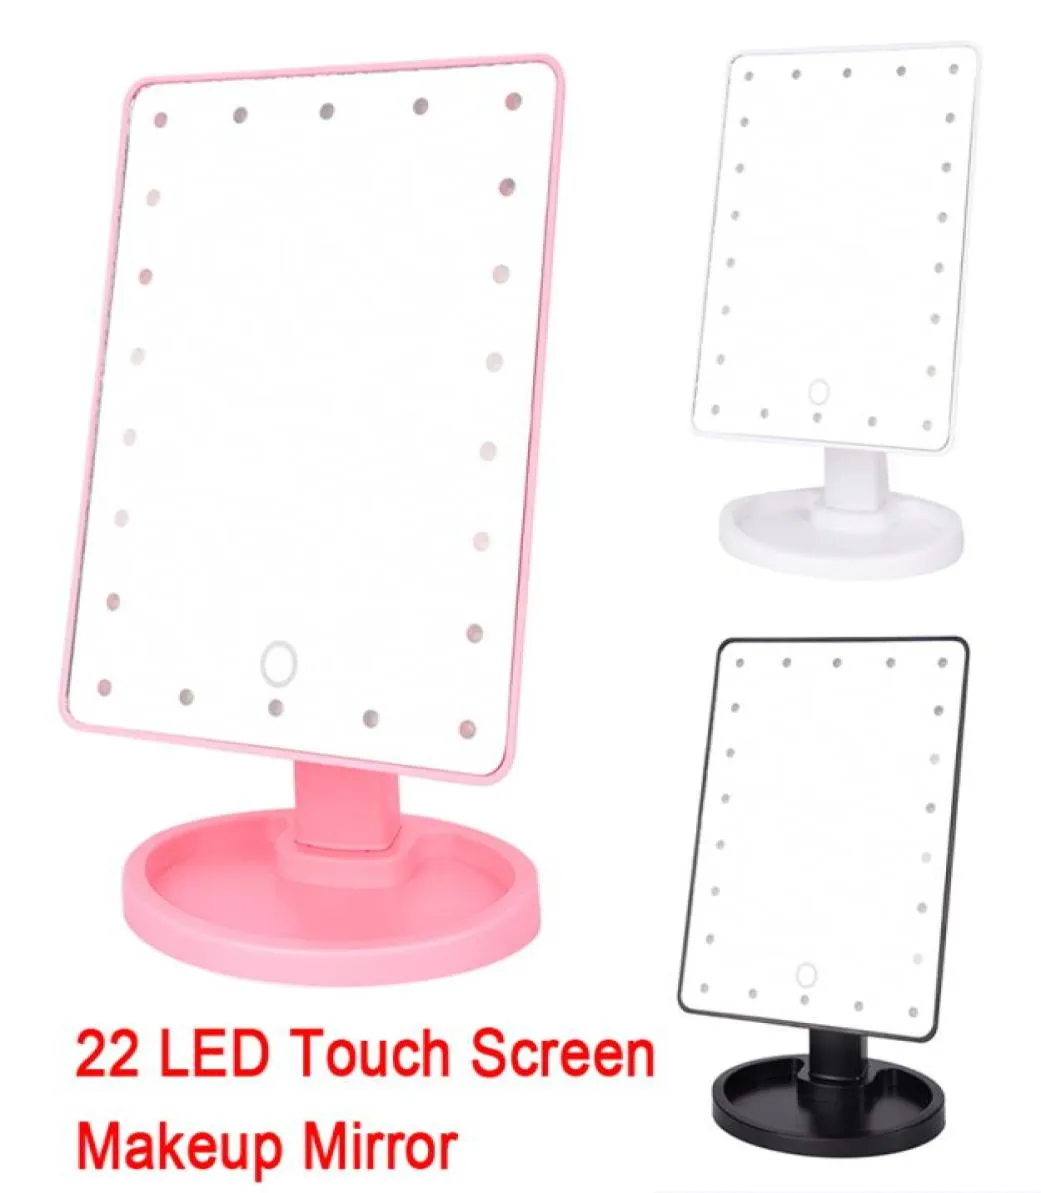 22 LED Touch SN Makeup Mirror Professional Vanity Mirror Lights Health Beauty Confertop 180 Rotating6188128